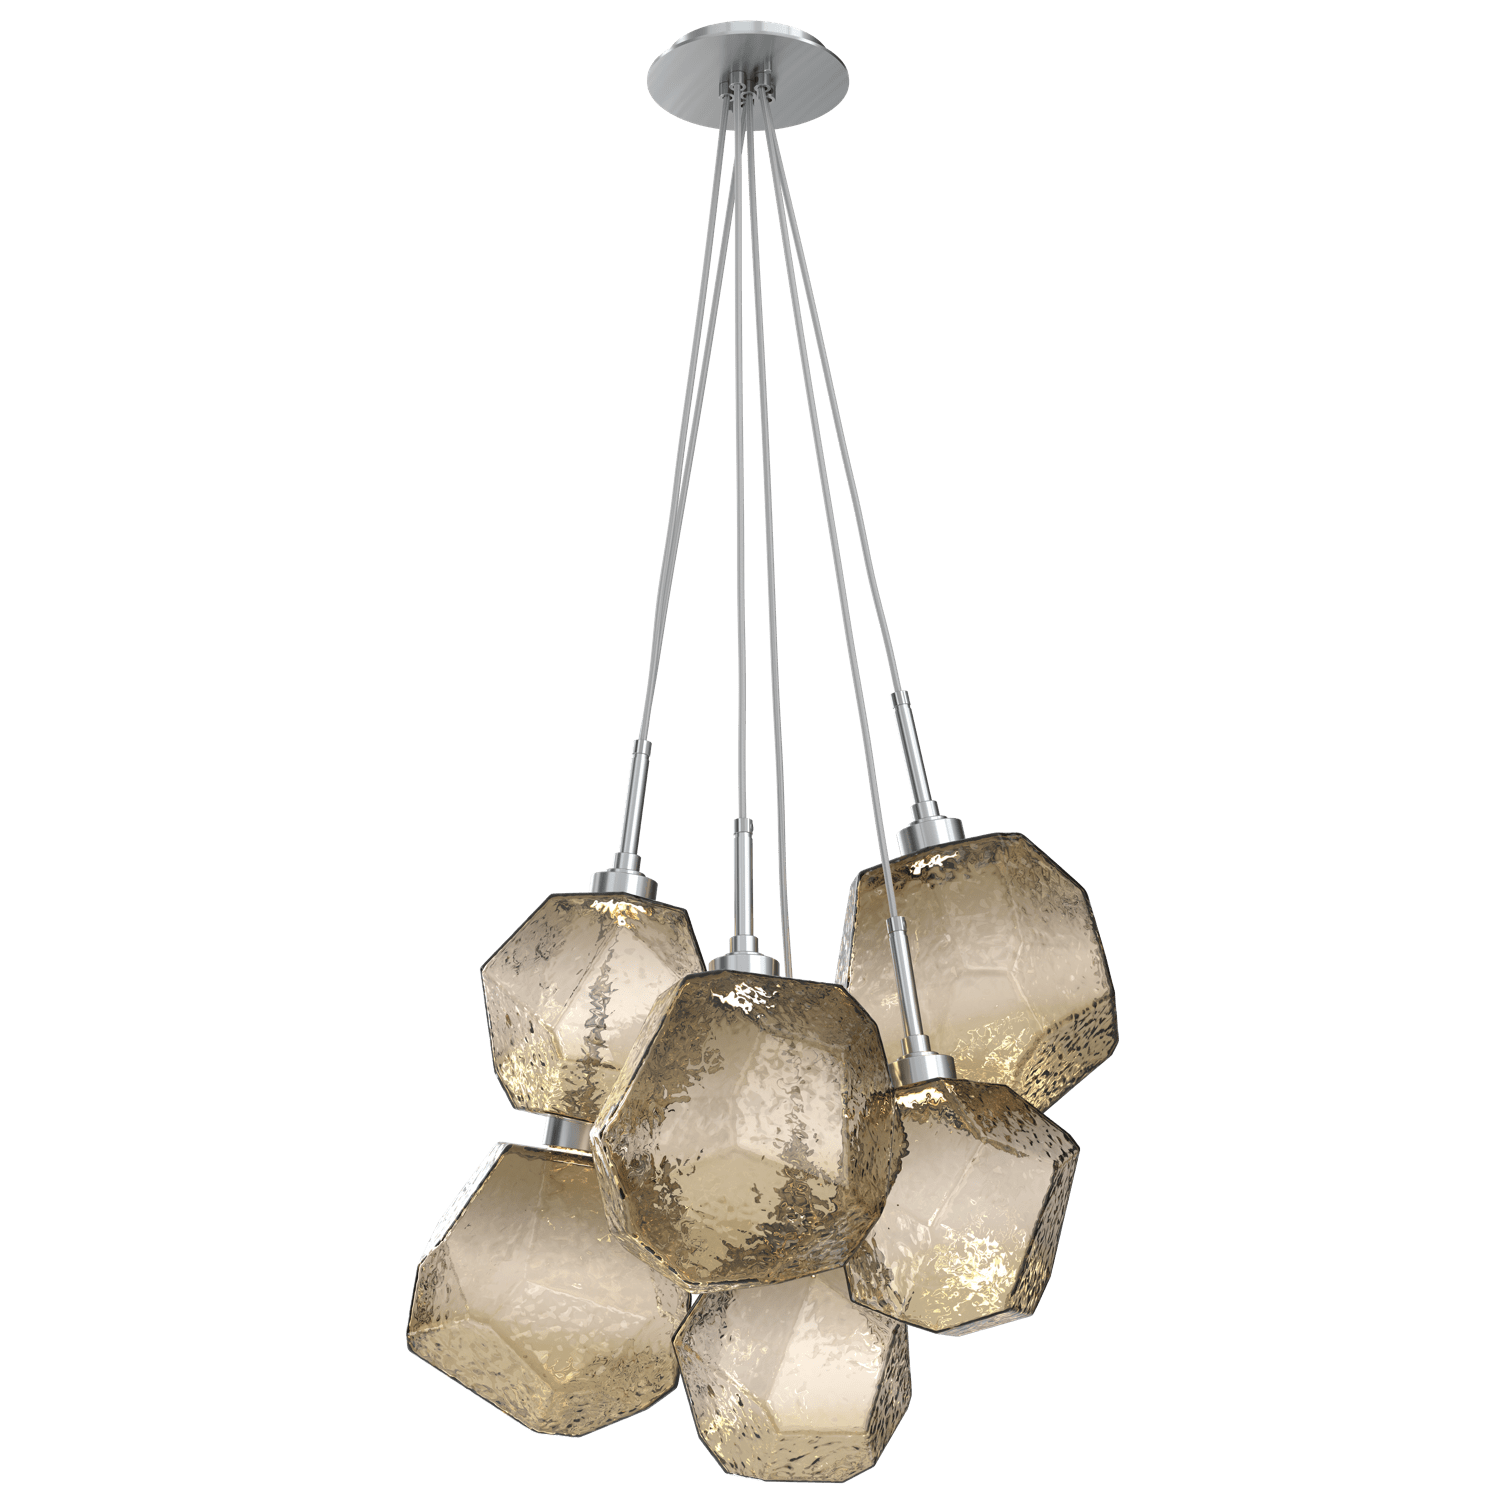 CHB0039-0F-SN-B-Hammerton-Studio-Gem-6-light-cluster-pendant-light-with-satin-nickel-finish-and-bronze-blown-glass-shades-and-LED-lamping